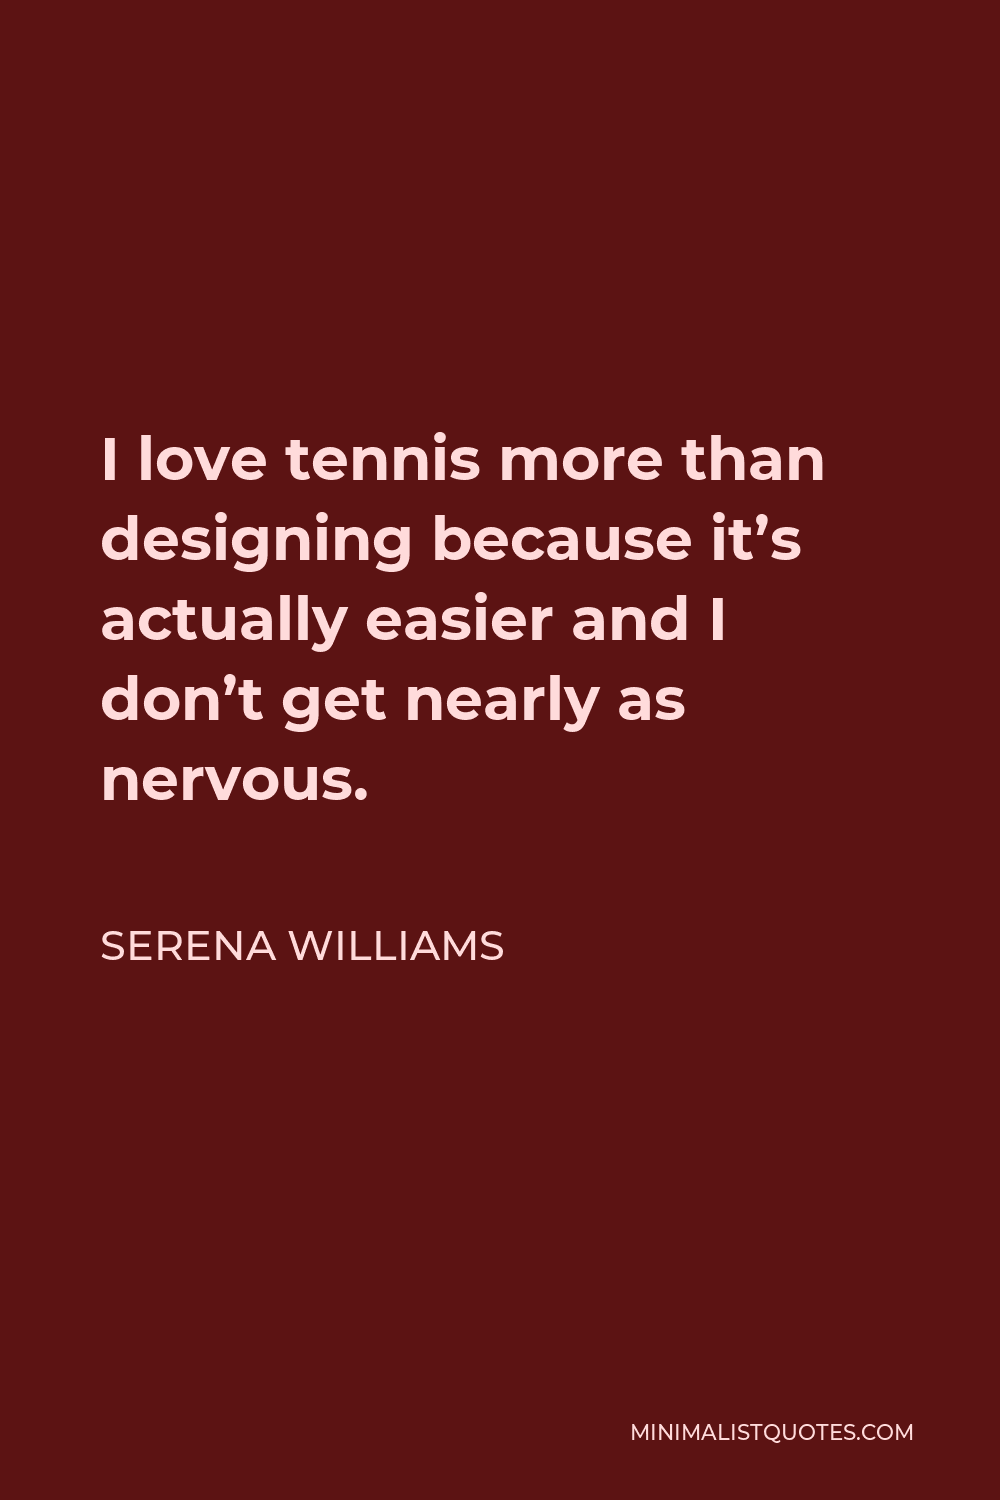 Serena Williams Quote - I love tennis more than designing because it’s actually easier and I don’t get nearly as nervous.